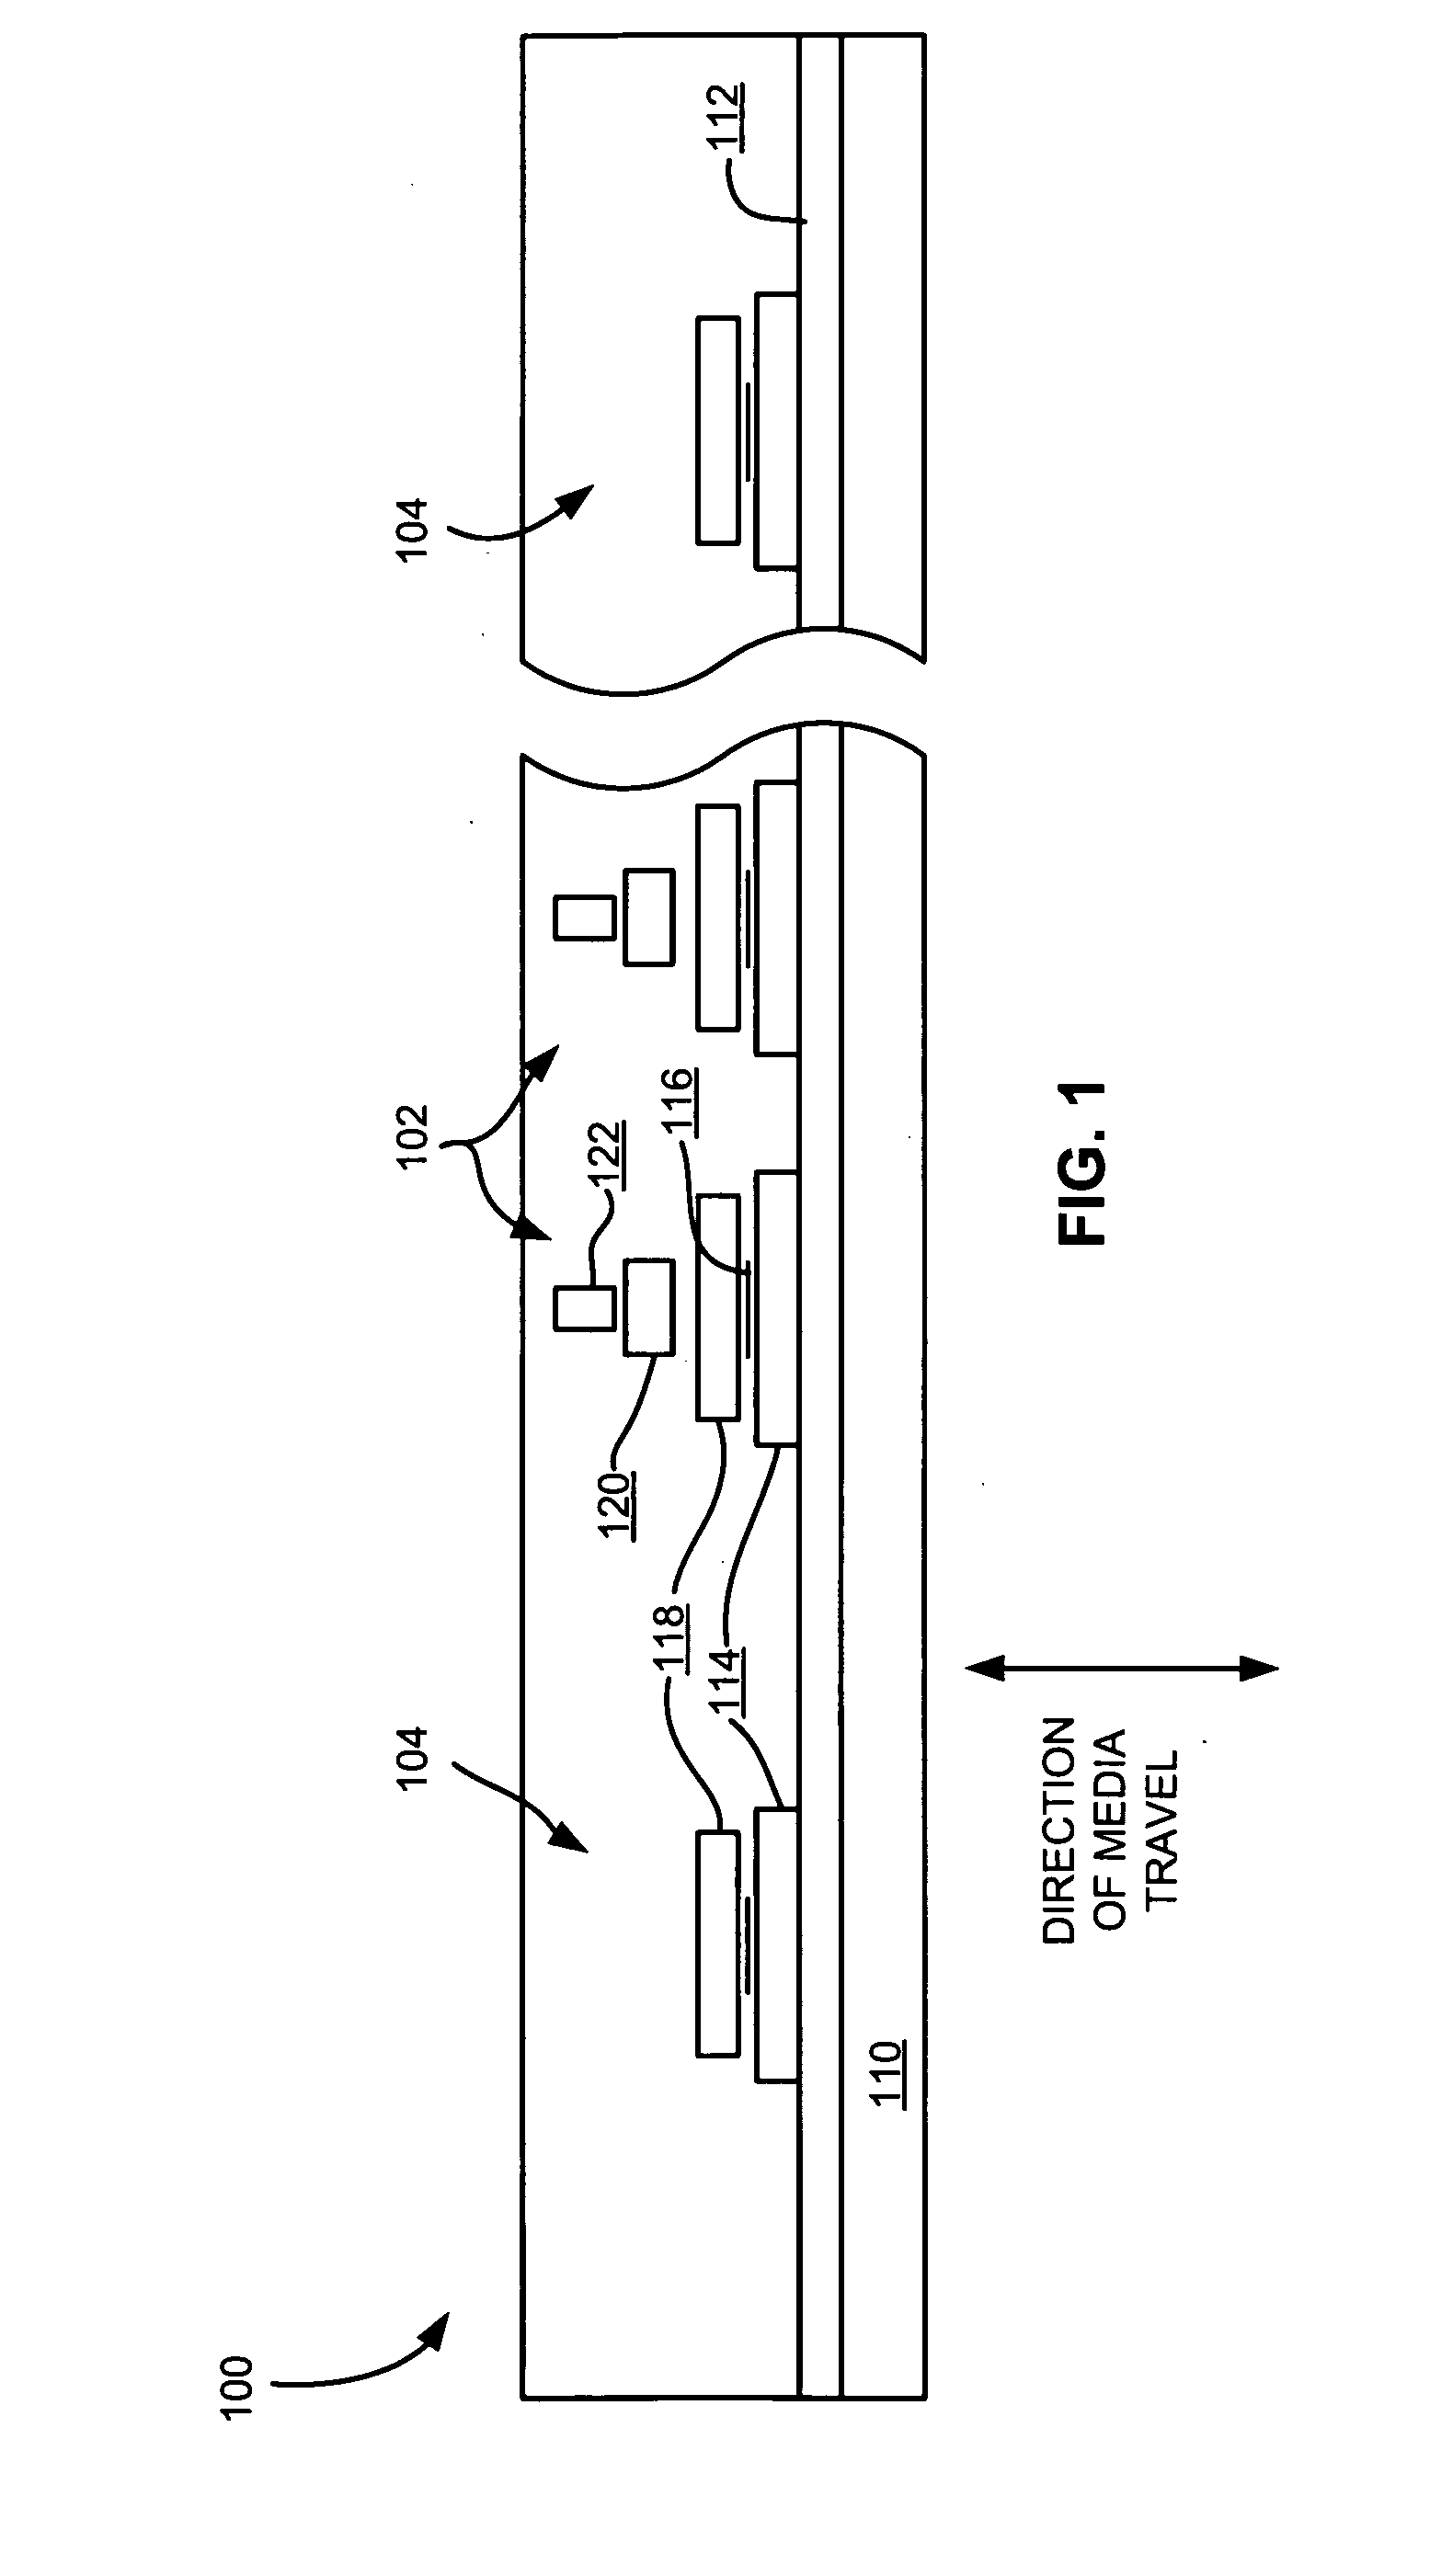 Tape head having write devices and narrower read devices